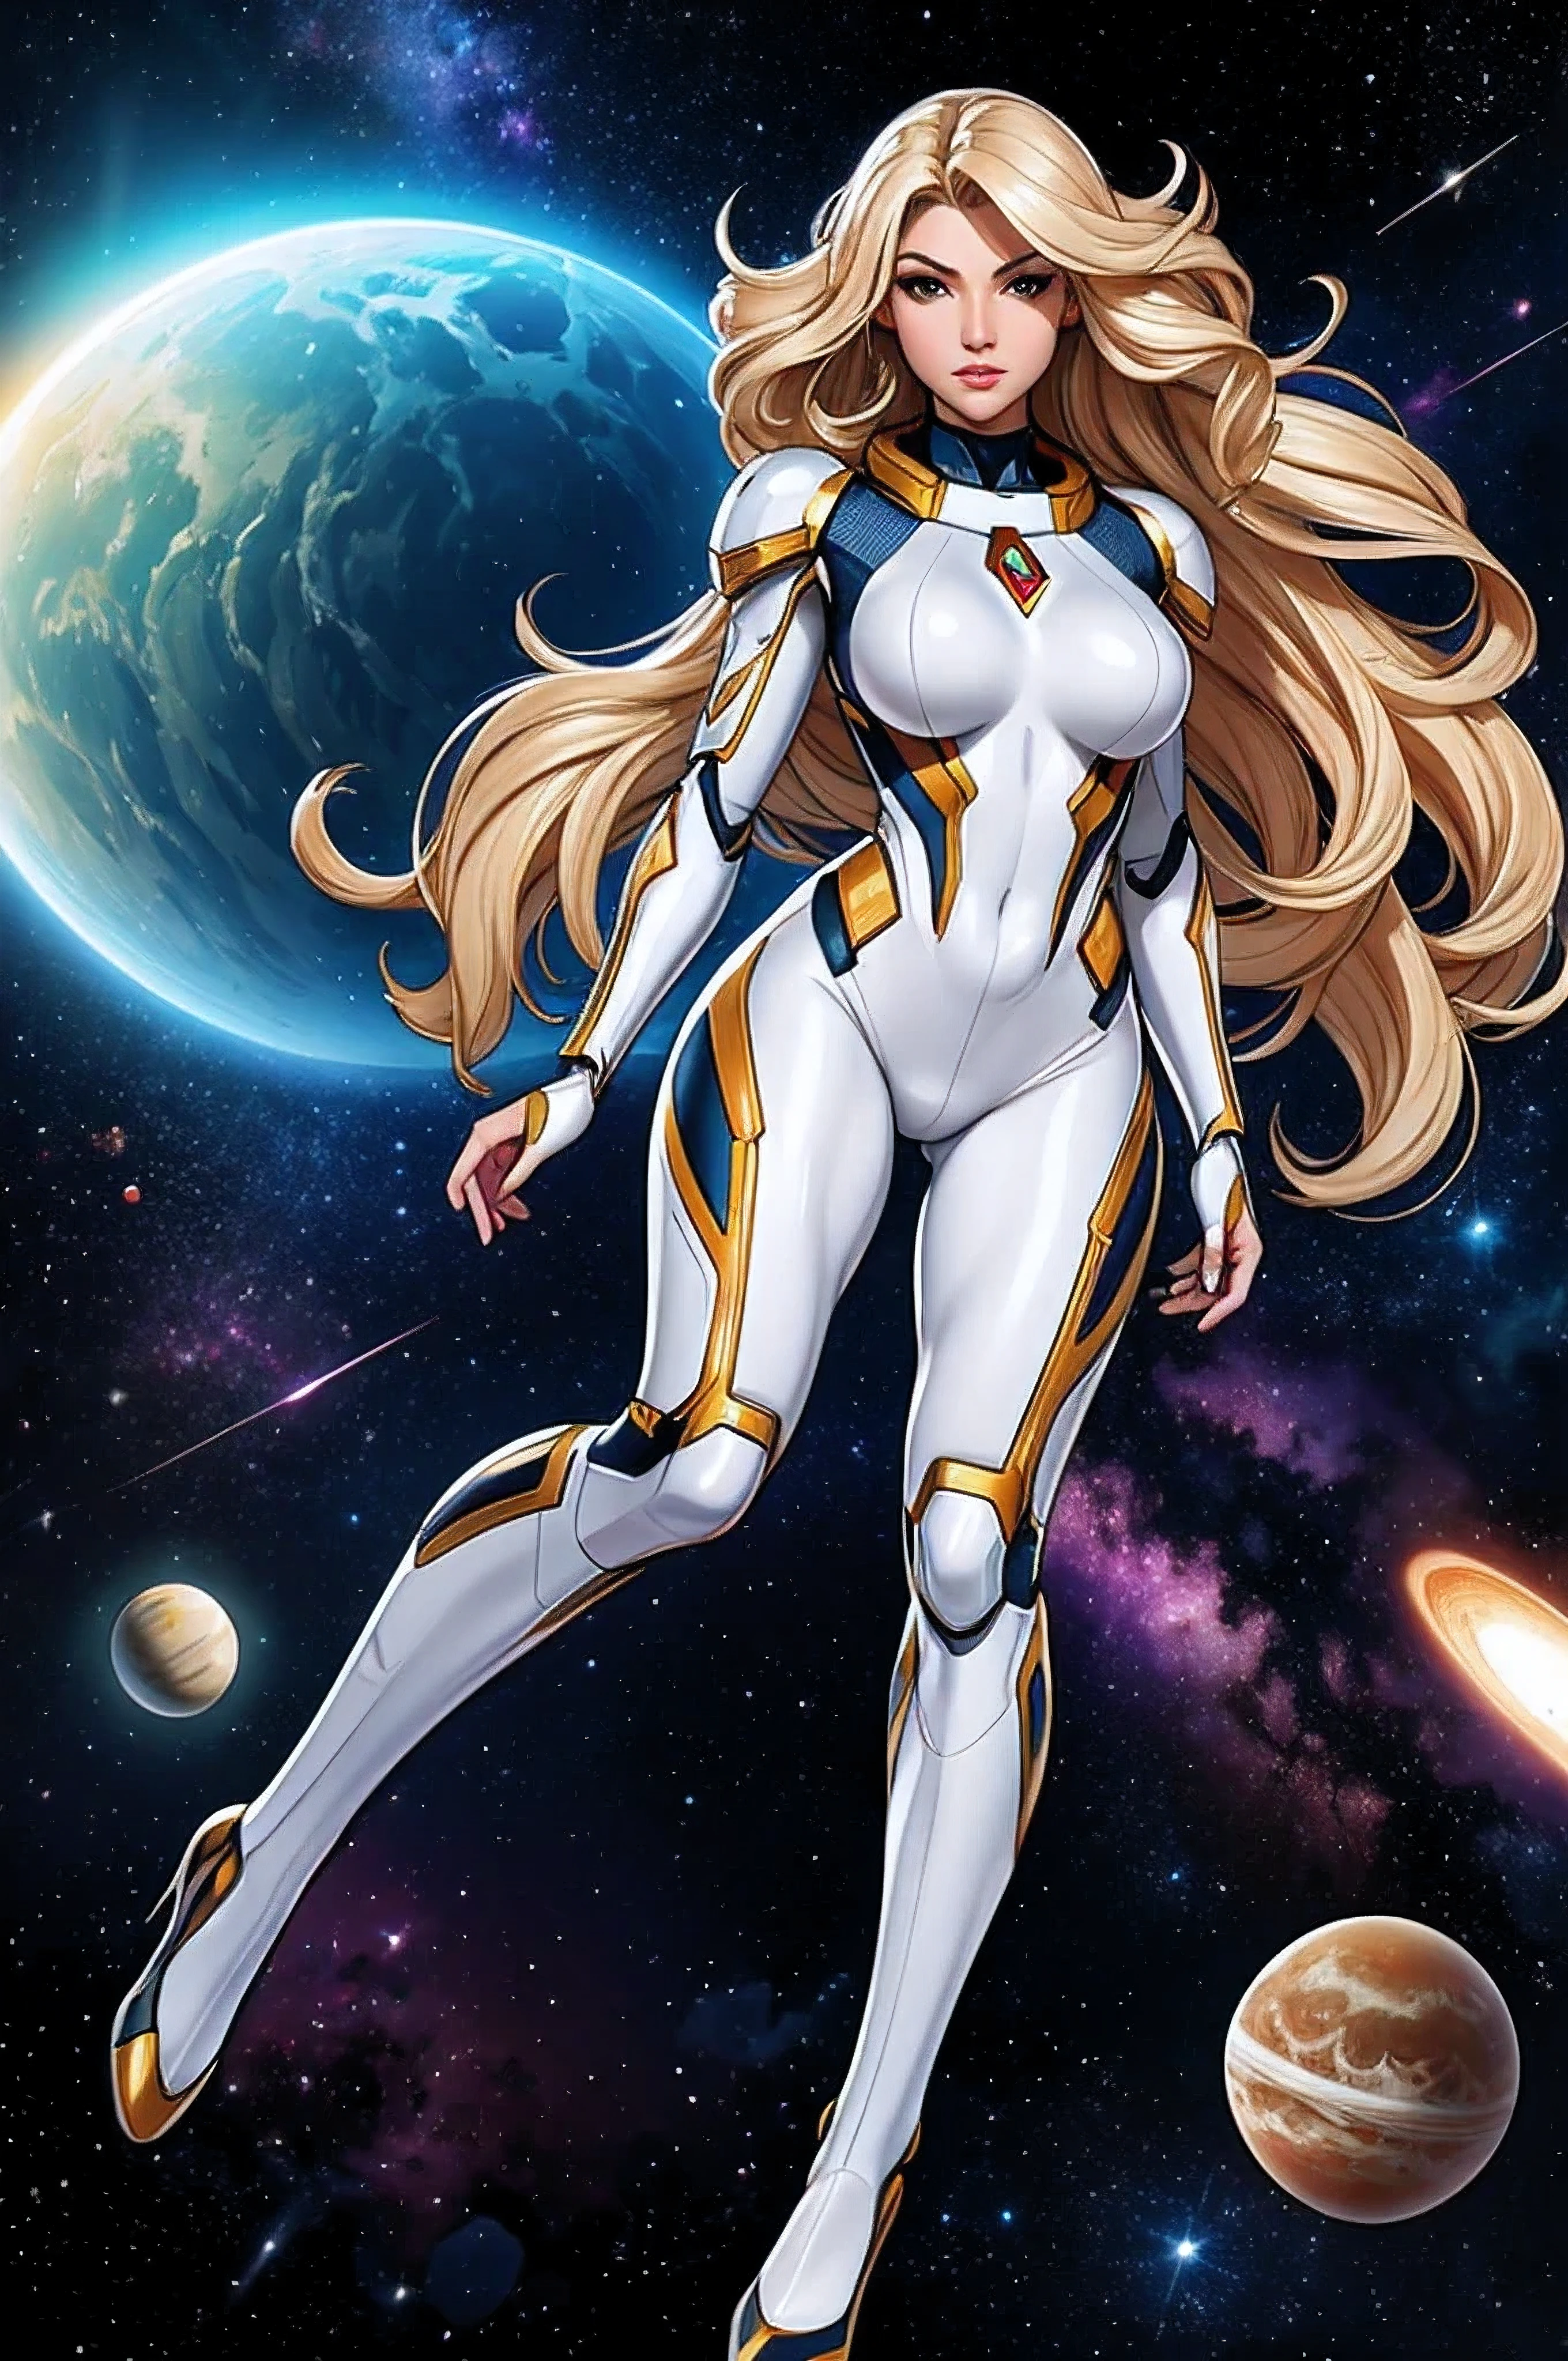 best quality, masterpiece, woman space super hero, beautiful face,full body,hi-tech armour over silver latex suit, long curly blonde hair,flying in super hero pose in deep space, with several planets and suns in the background
